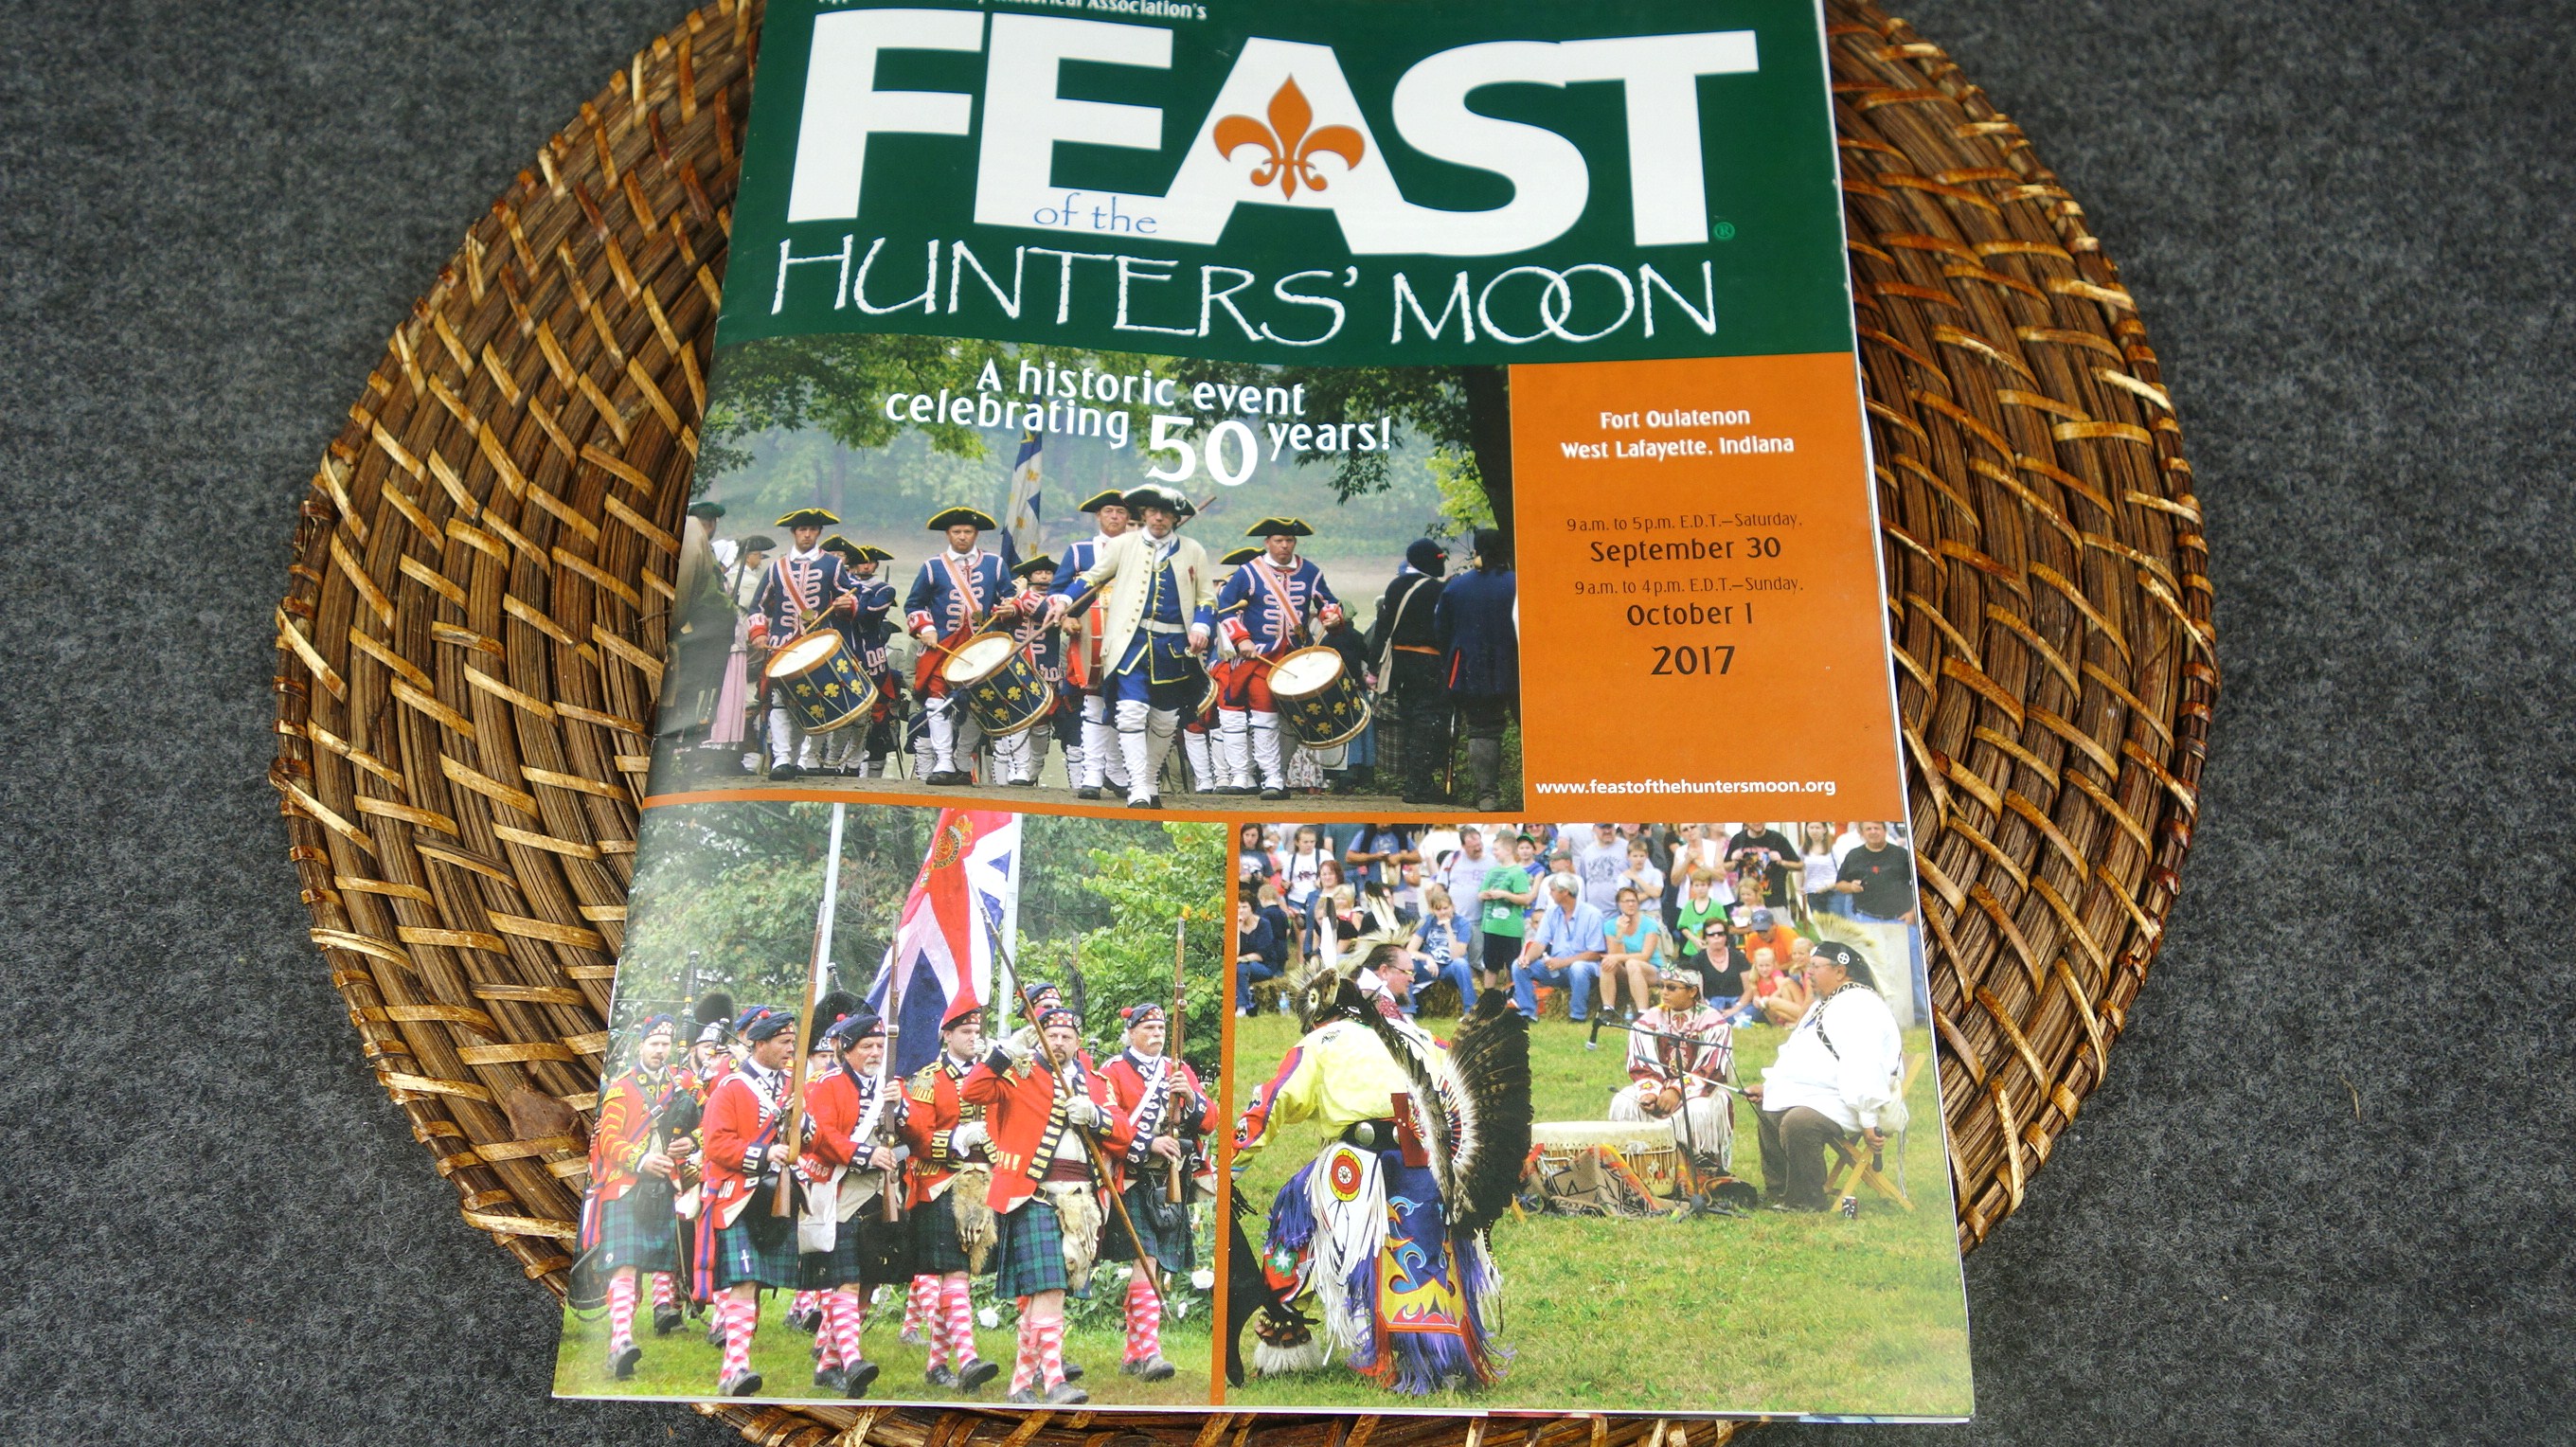 feast-of-the-hunters-moon-food-for-your-body-mind-and-spiritfood-for-your-body-mind-and